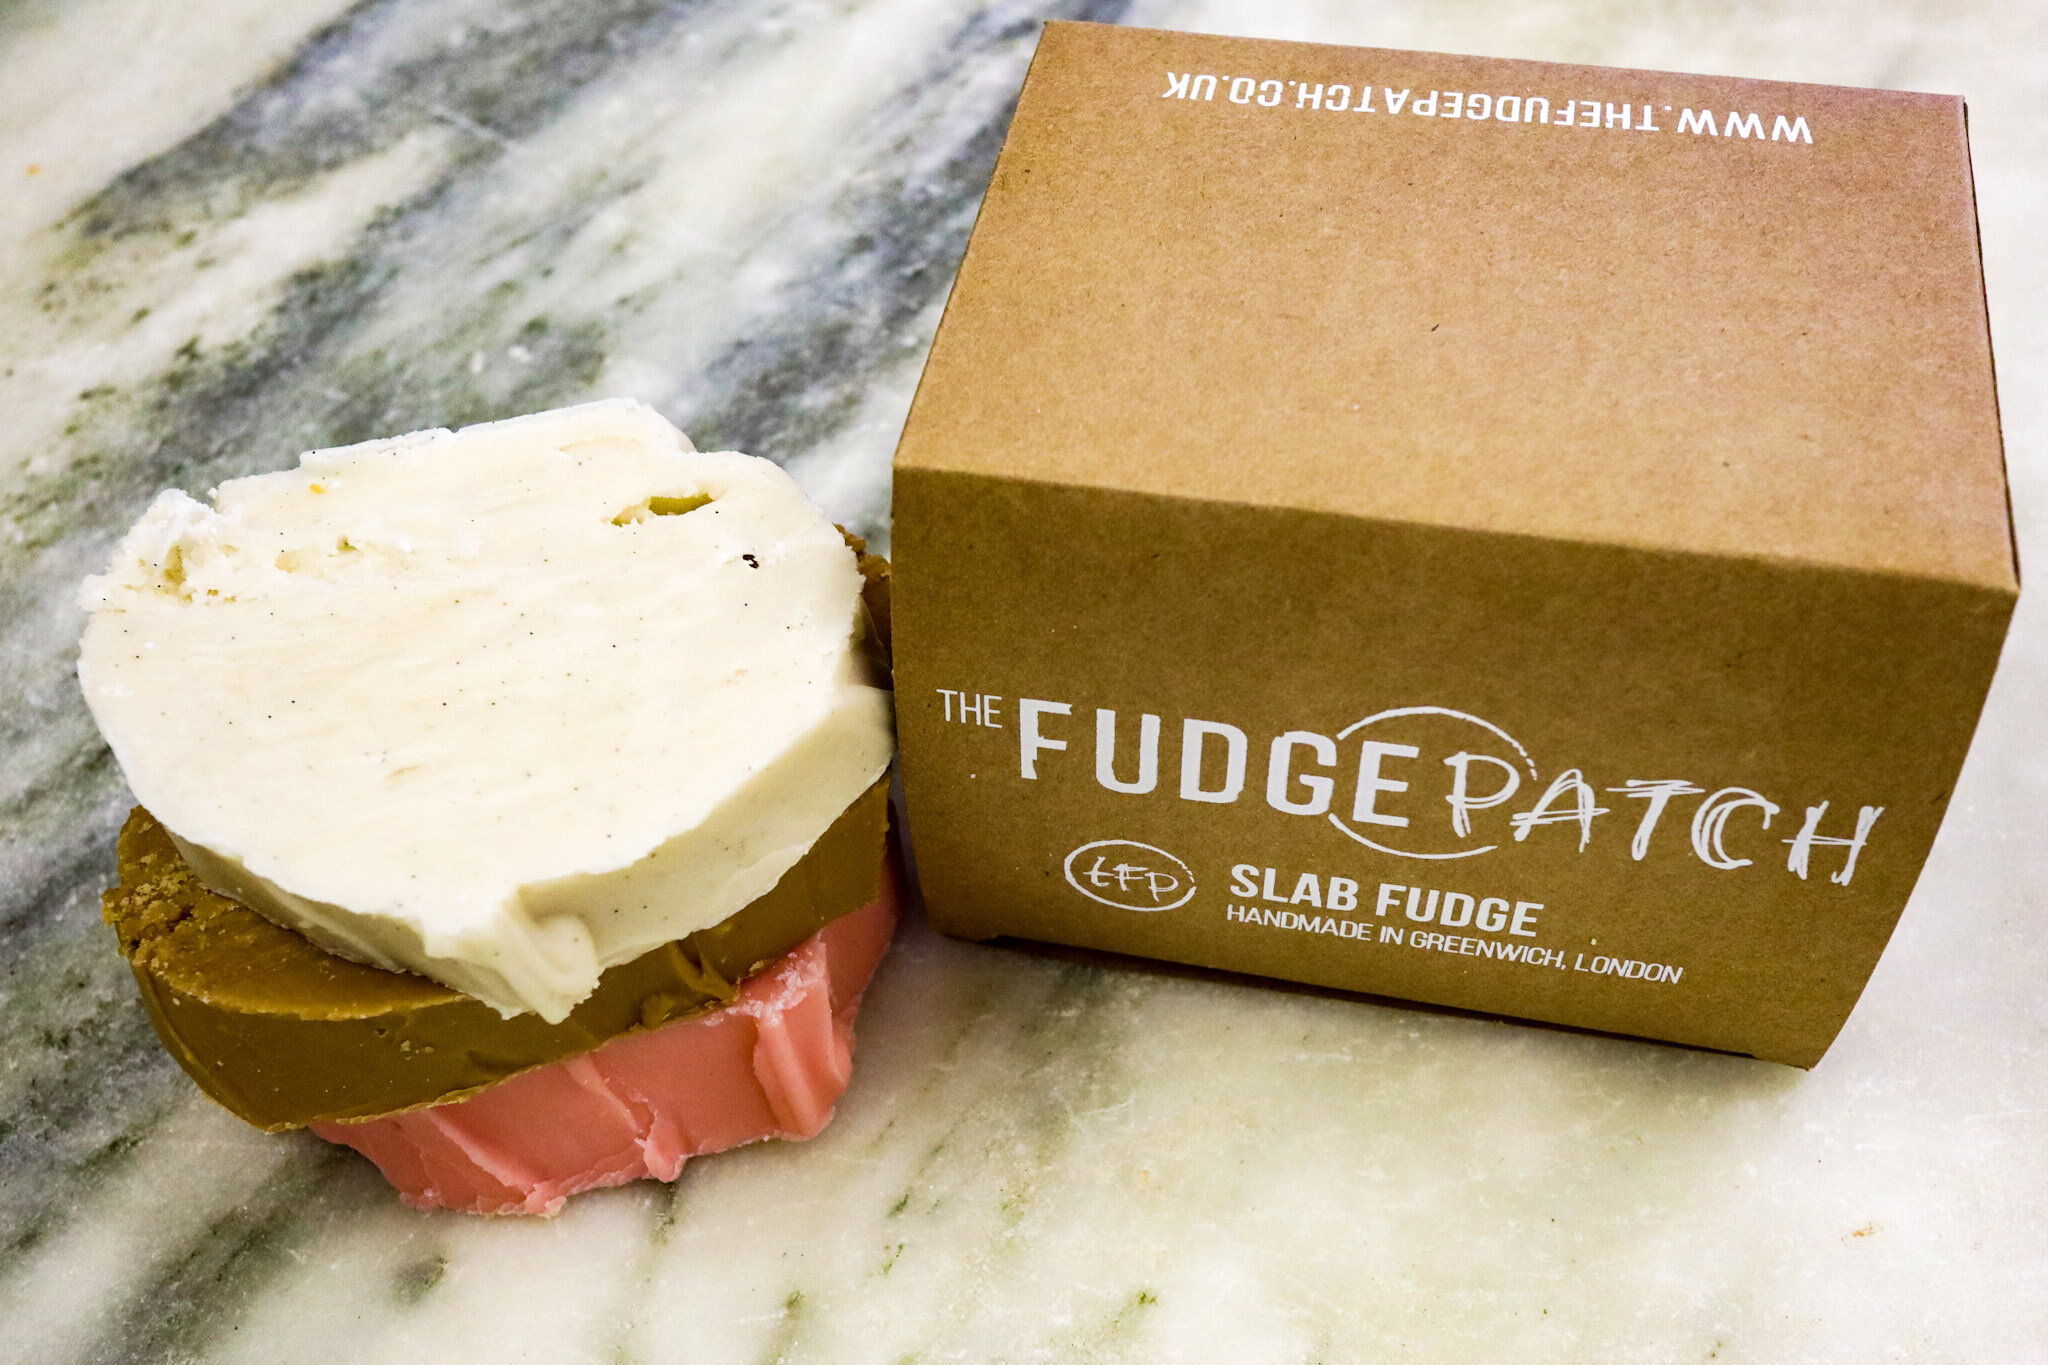 Selection box of handmade fudge from the Fudge Patch